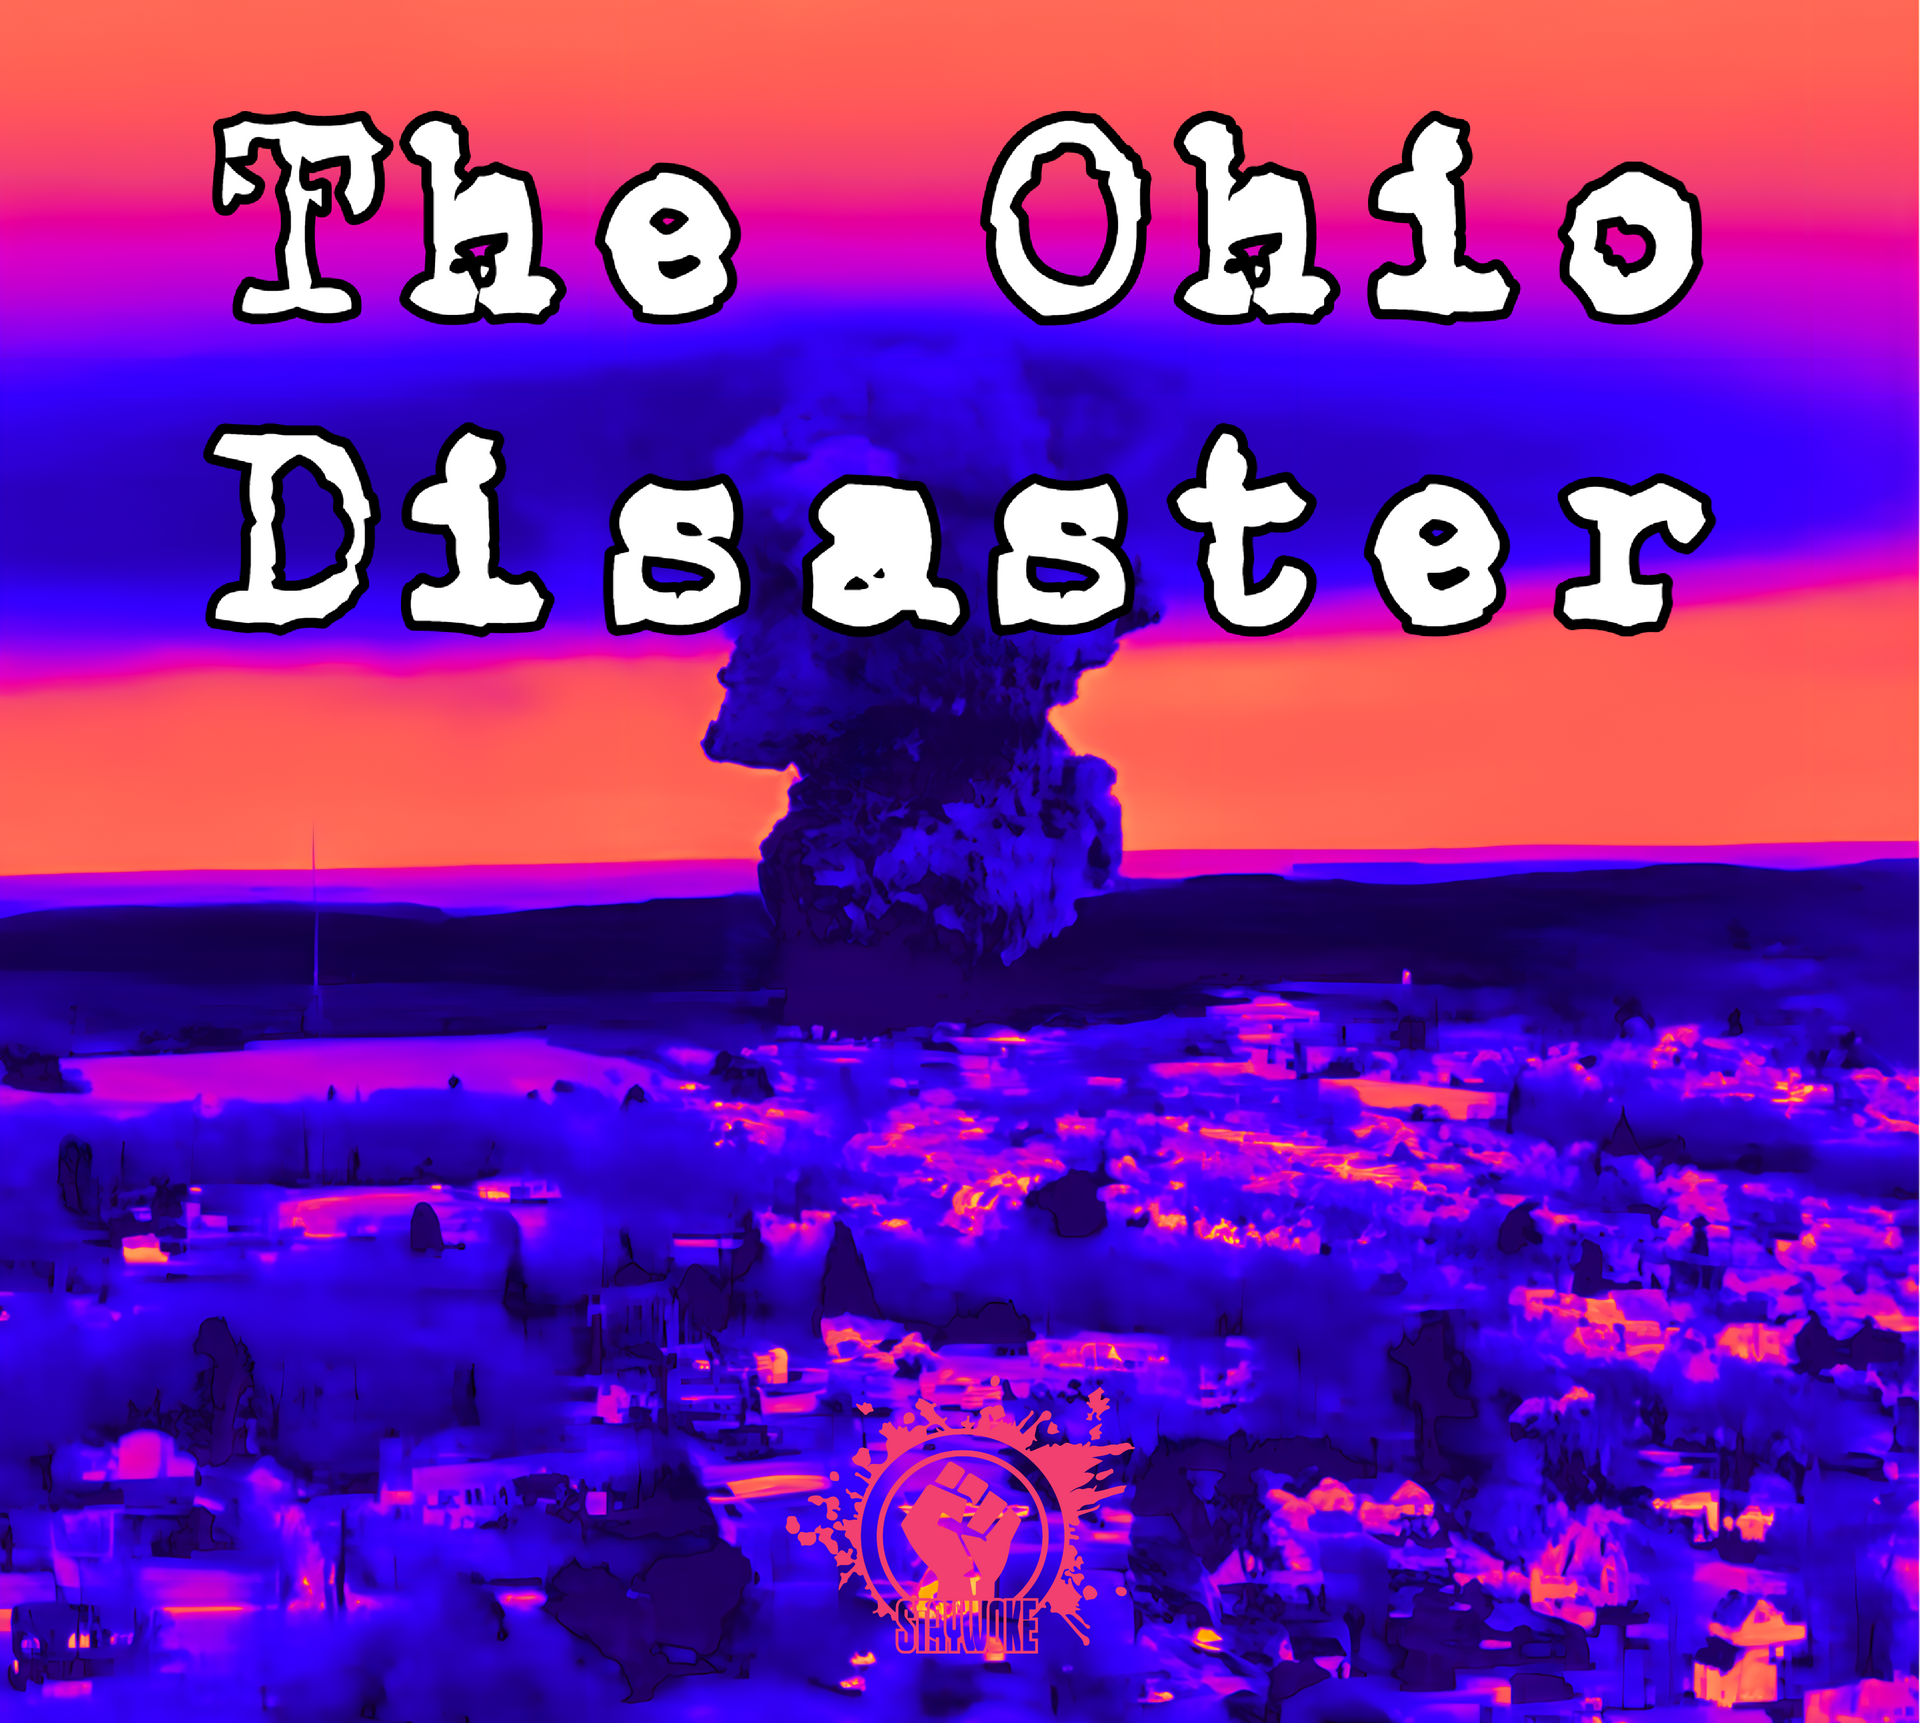 The East Palestine Ohio Disaster